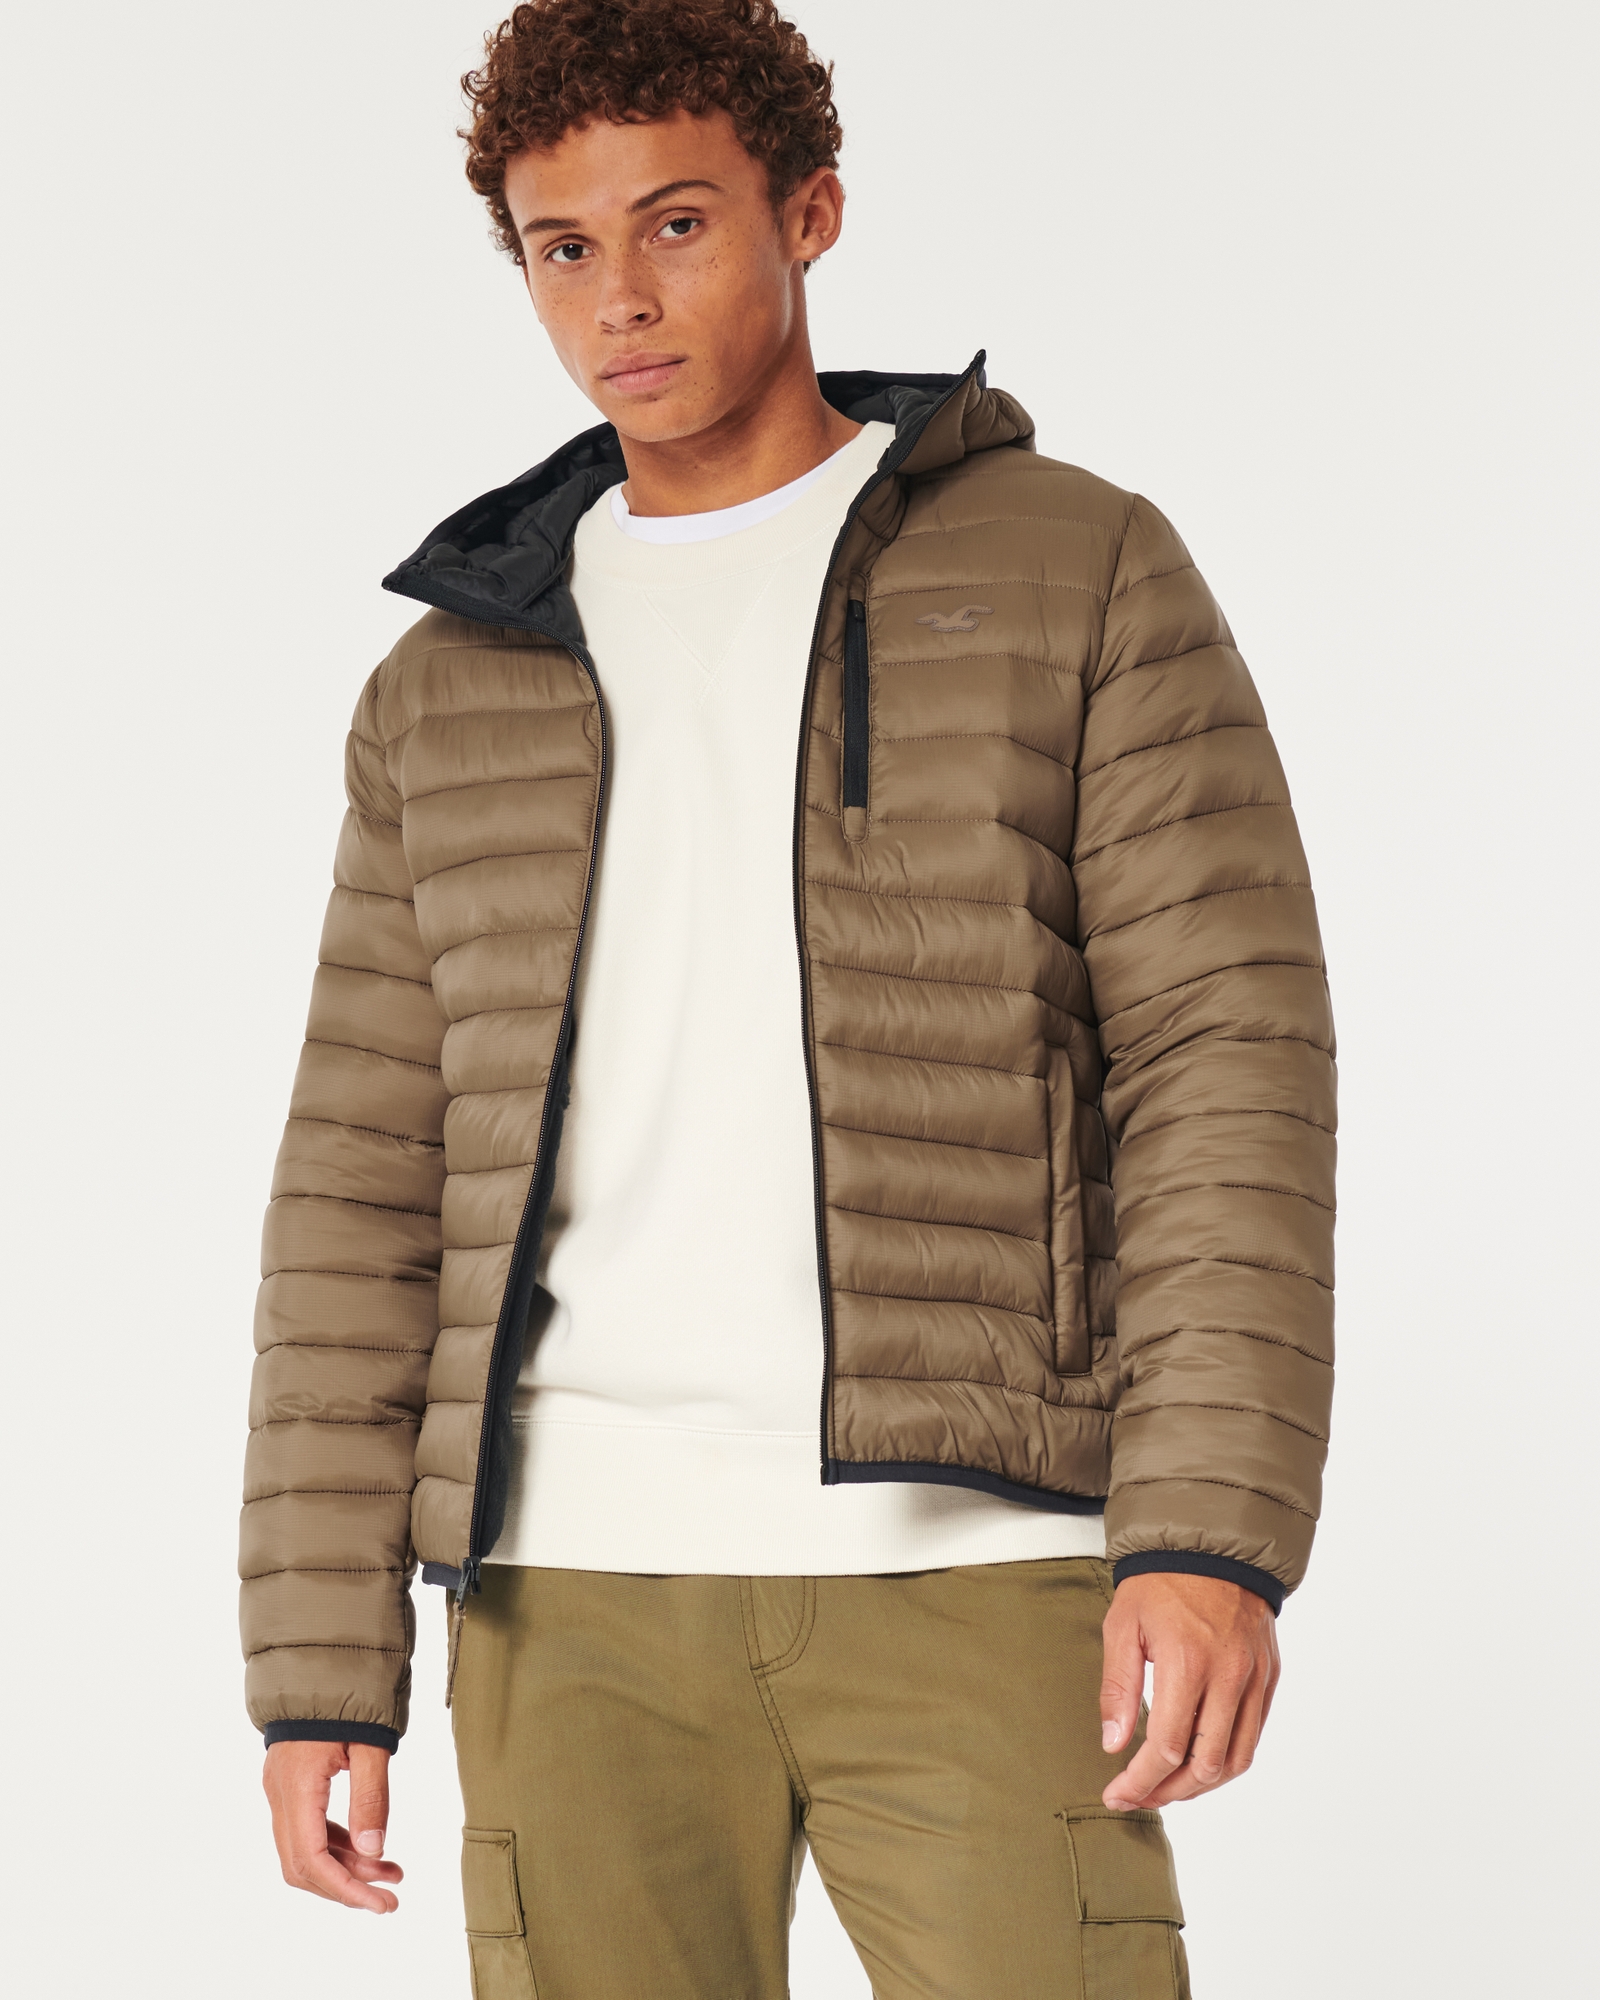 Men's Ultimate Puffer Jacket, Men's Up To 30% Off Select Styles